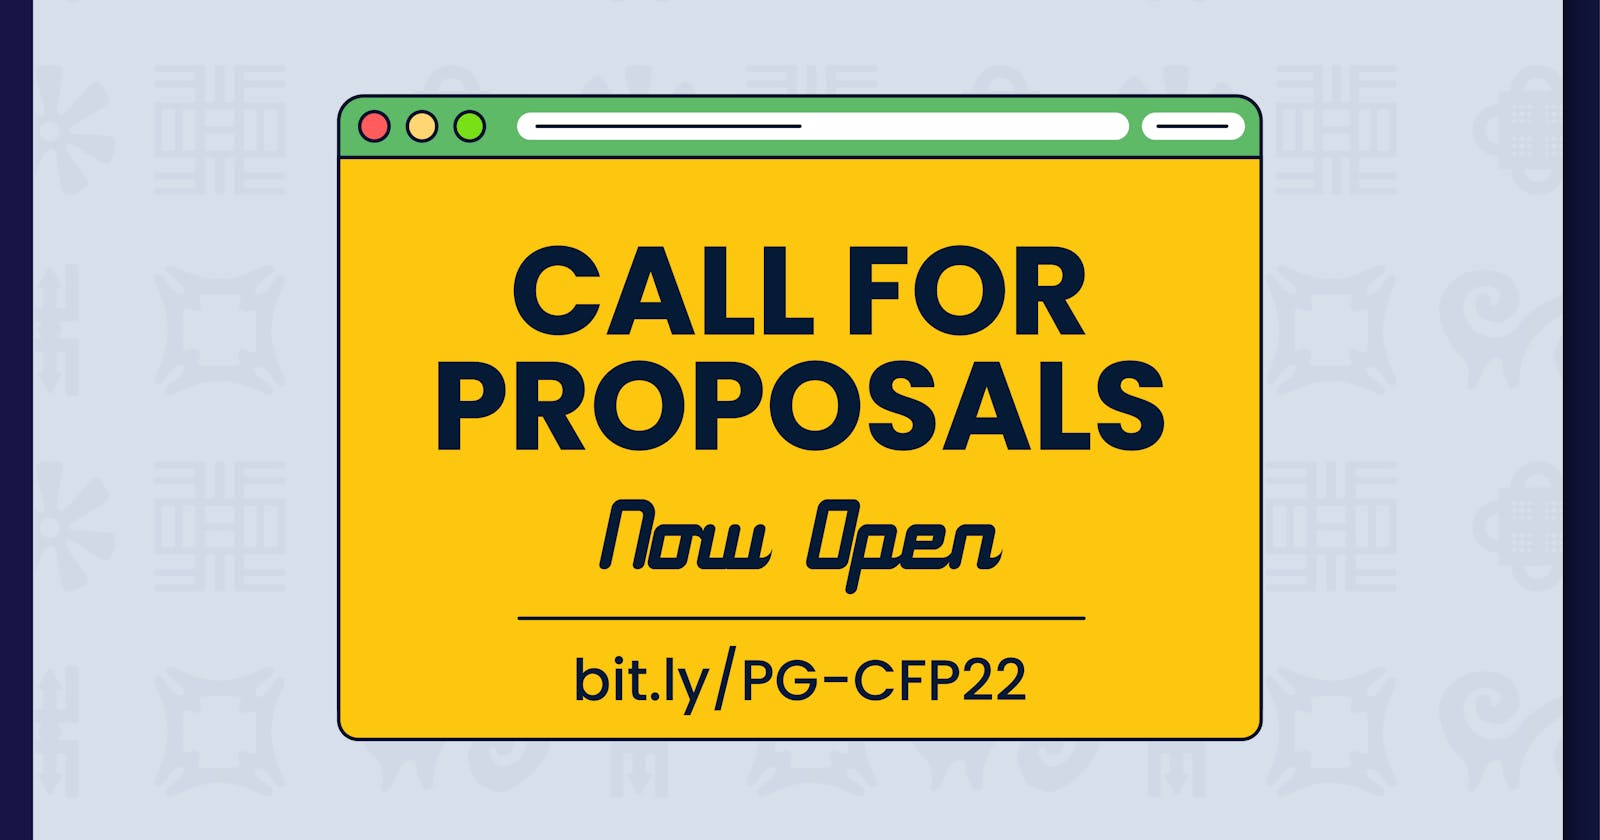 Our 2022 CFP is Open